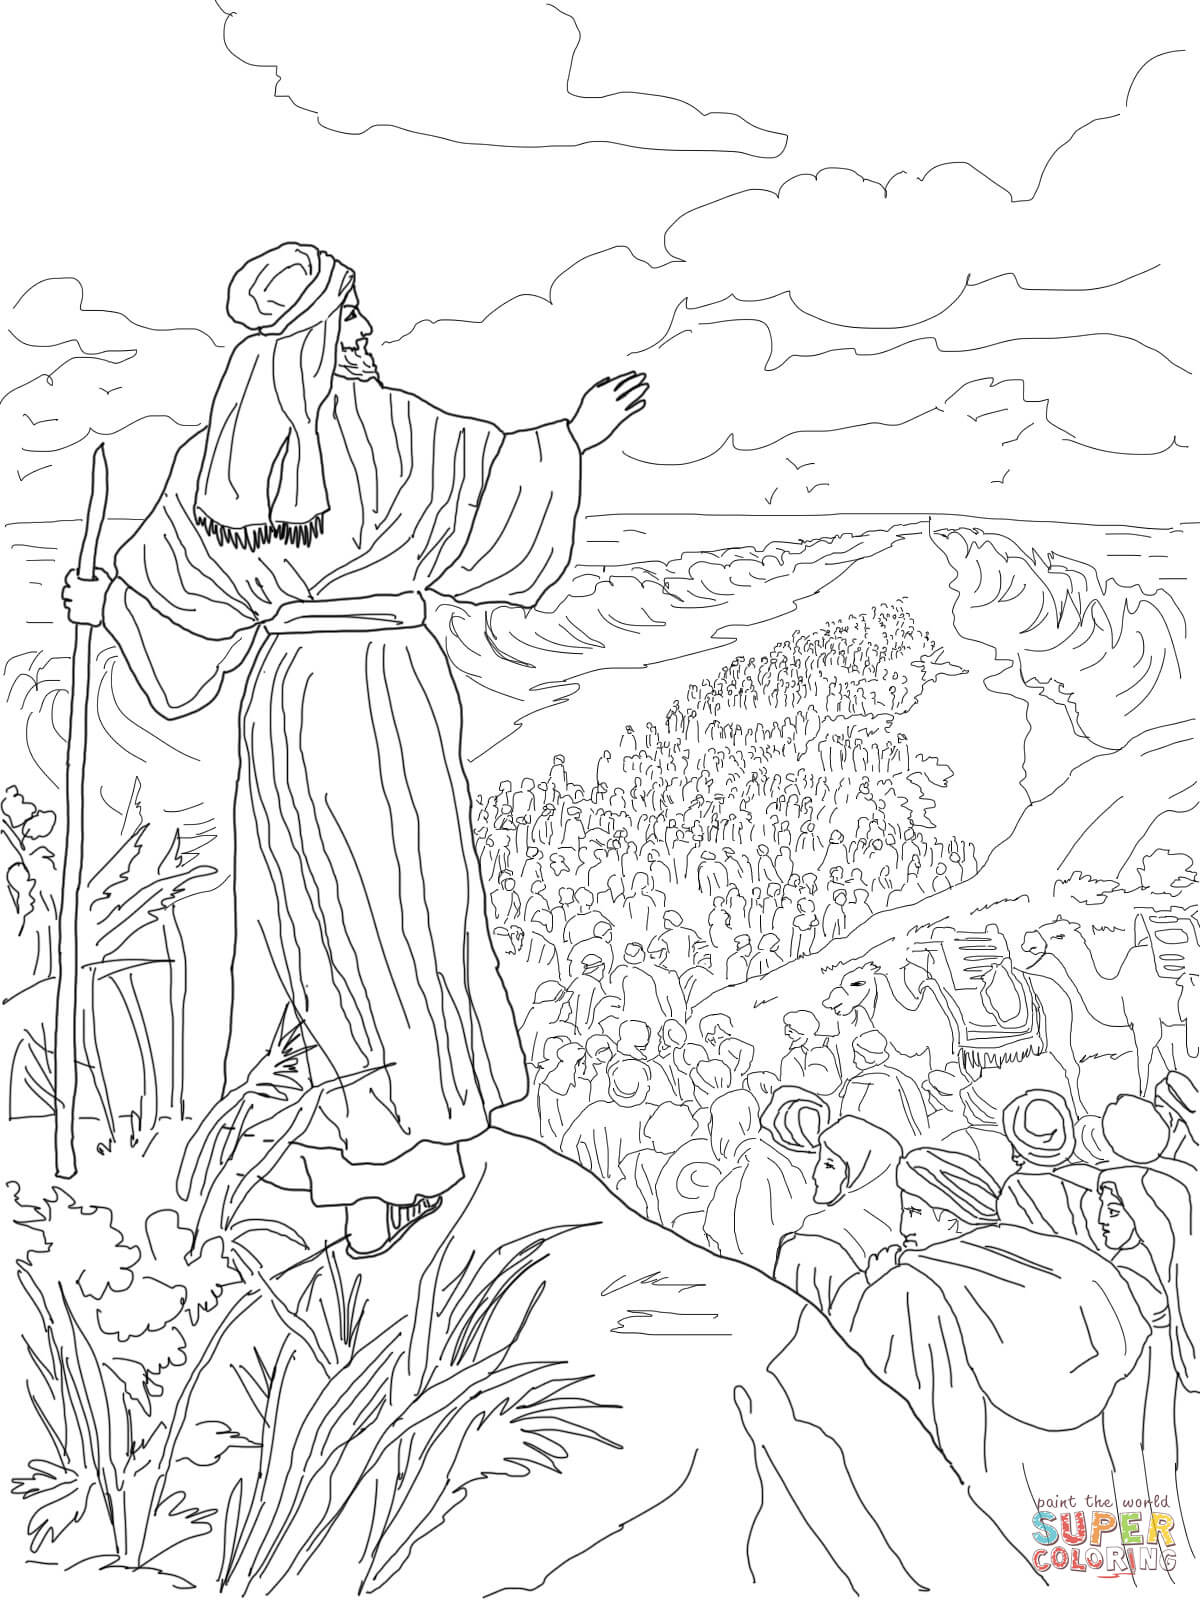 Israelites Crossing the Red Sea coloring page